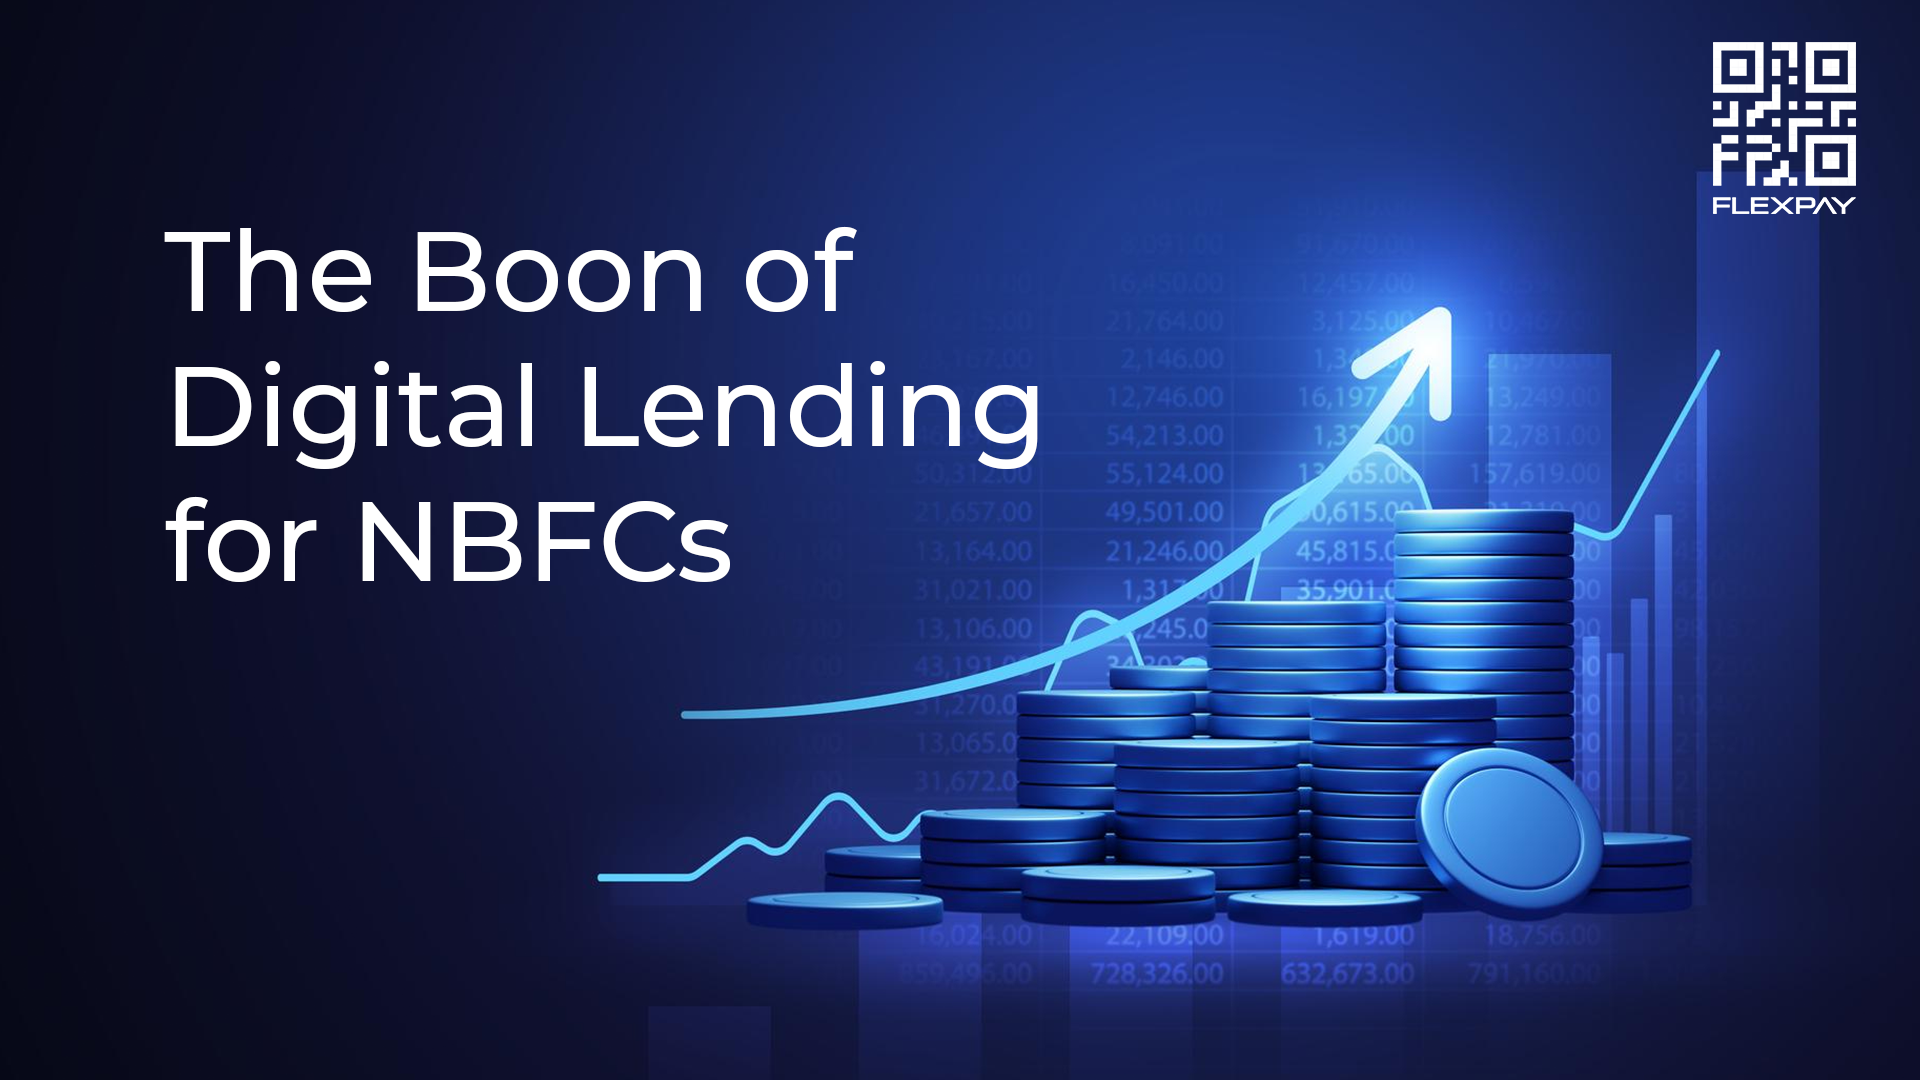 The Power of Digital Lending Empowering NBFCs to Thrive